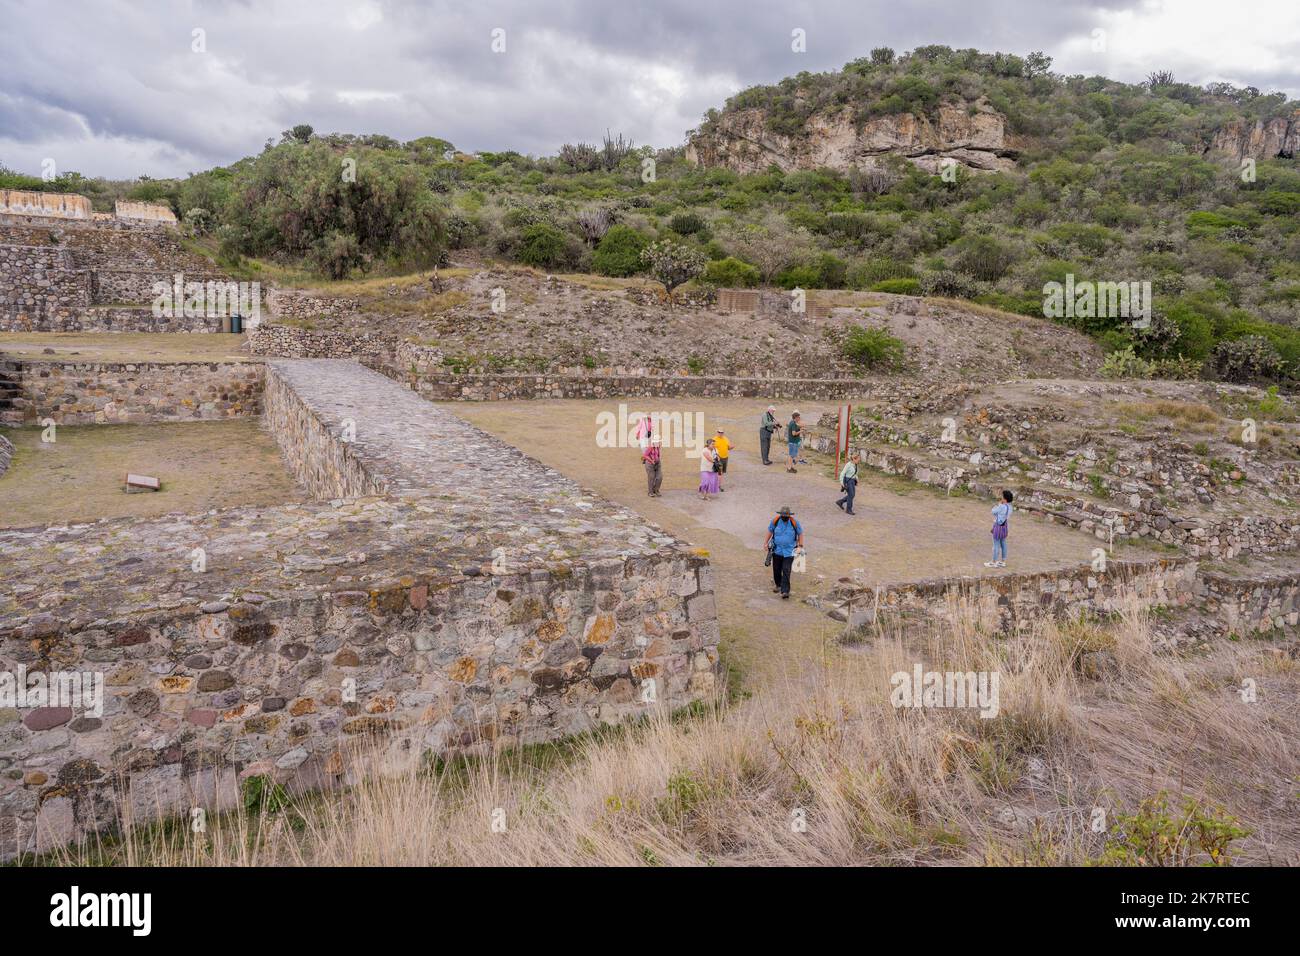 Tourists at the archaeological site of Yagul (known as Pueblo Viejo locally), once inhabited by the Pre-Columbian civilization of the Zapotecs, in the Stock Photo